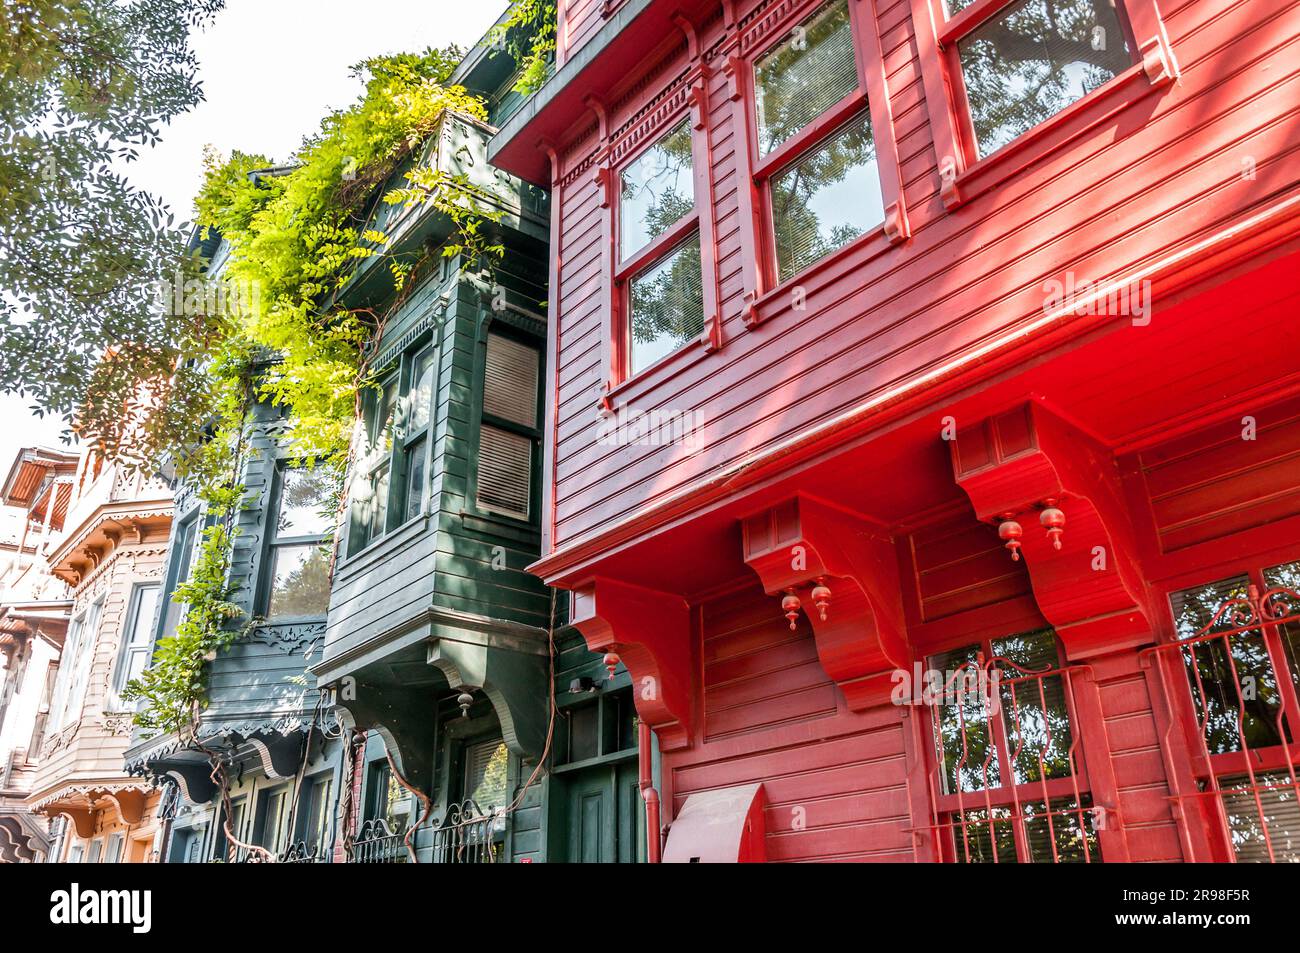 Istanbul, Turkey - June 3, 2012: View from Istanbul streets, traditional wooden architecture in Kuzguncuk district on the Asian side of Istanbul. Stock Photo